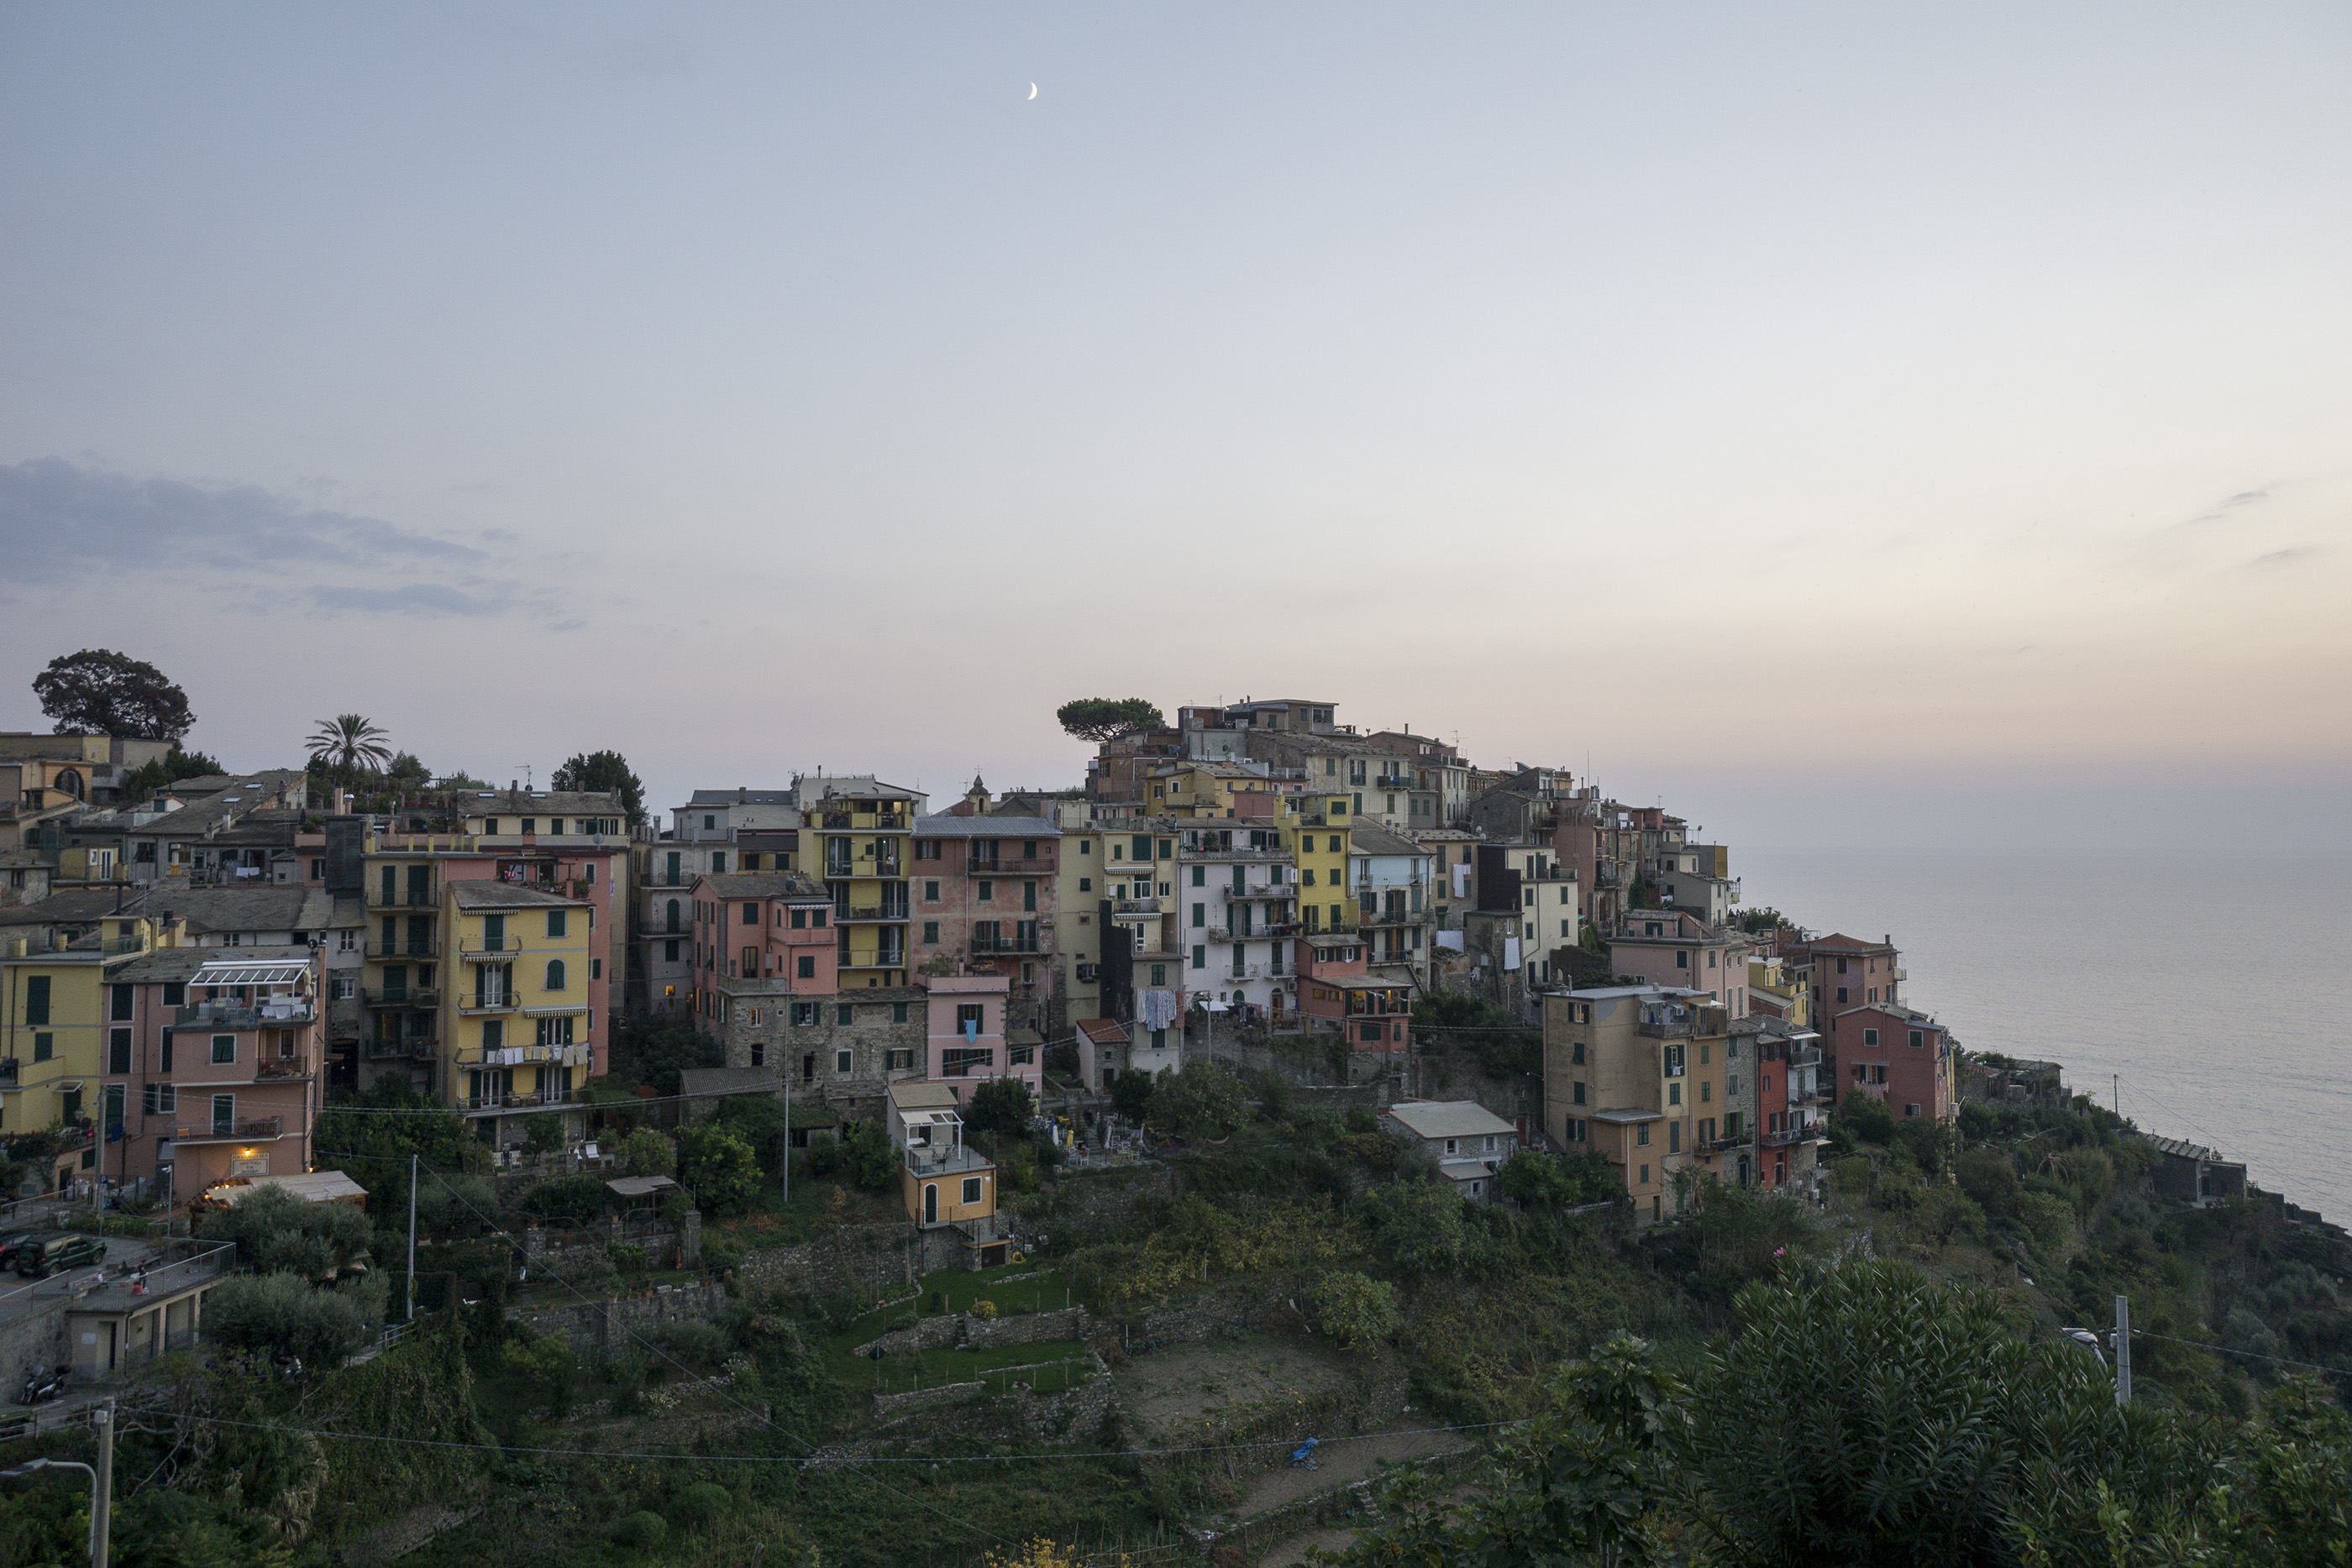 Stay in Corniglia: why we loved this village